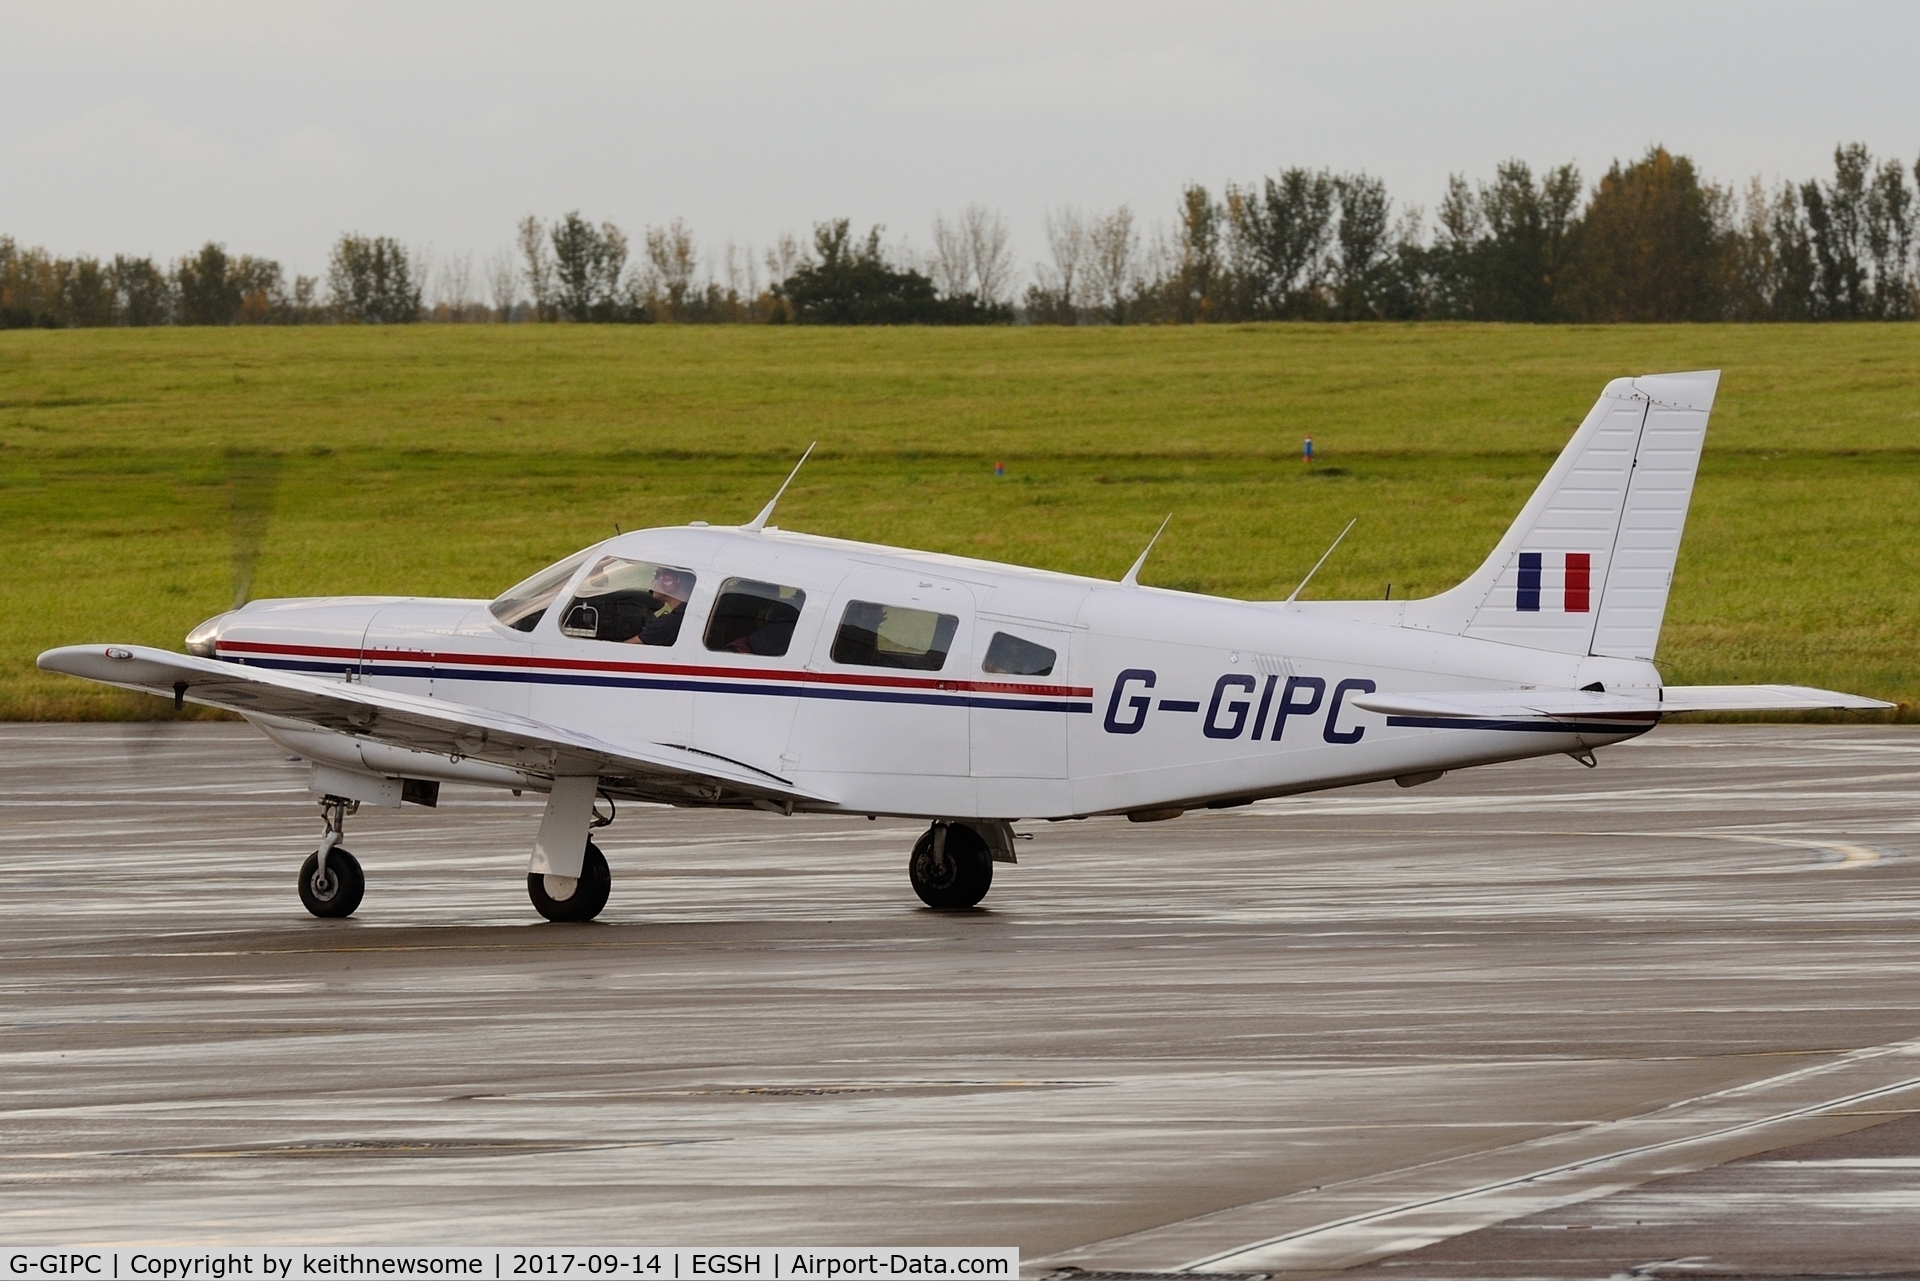 G-GIPC, 1982 Piper PA-32R-301 Saratoga SP C/N 32R-8313005, Unexpected late visitor.